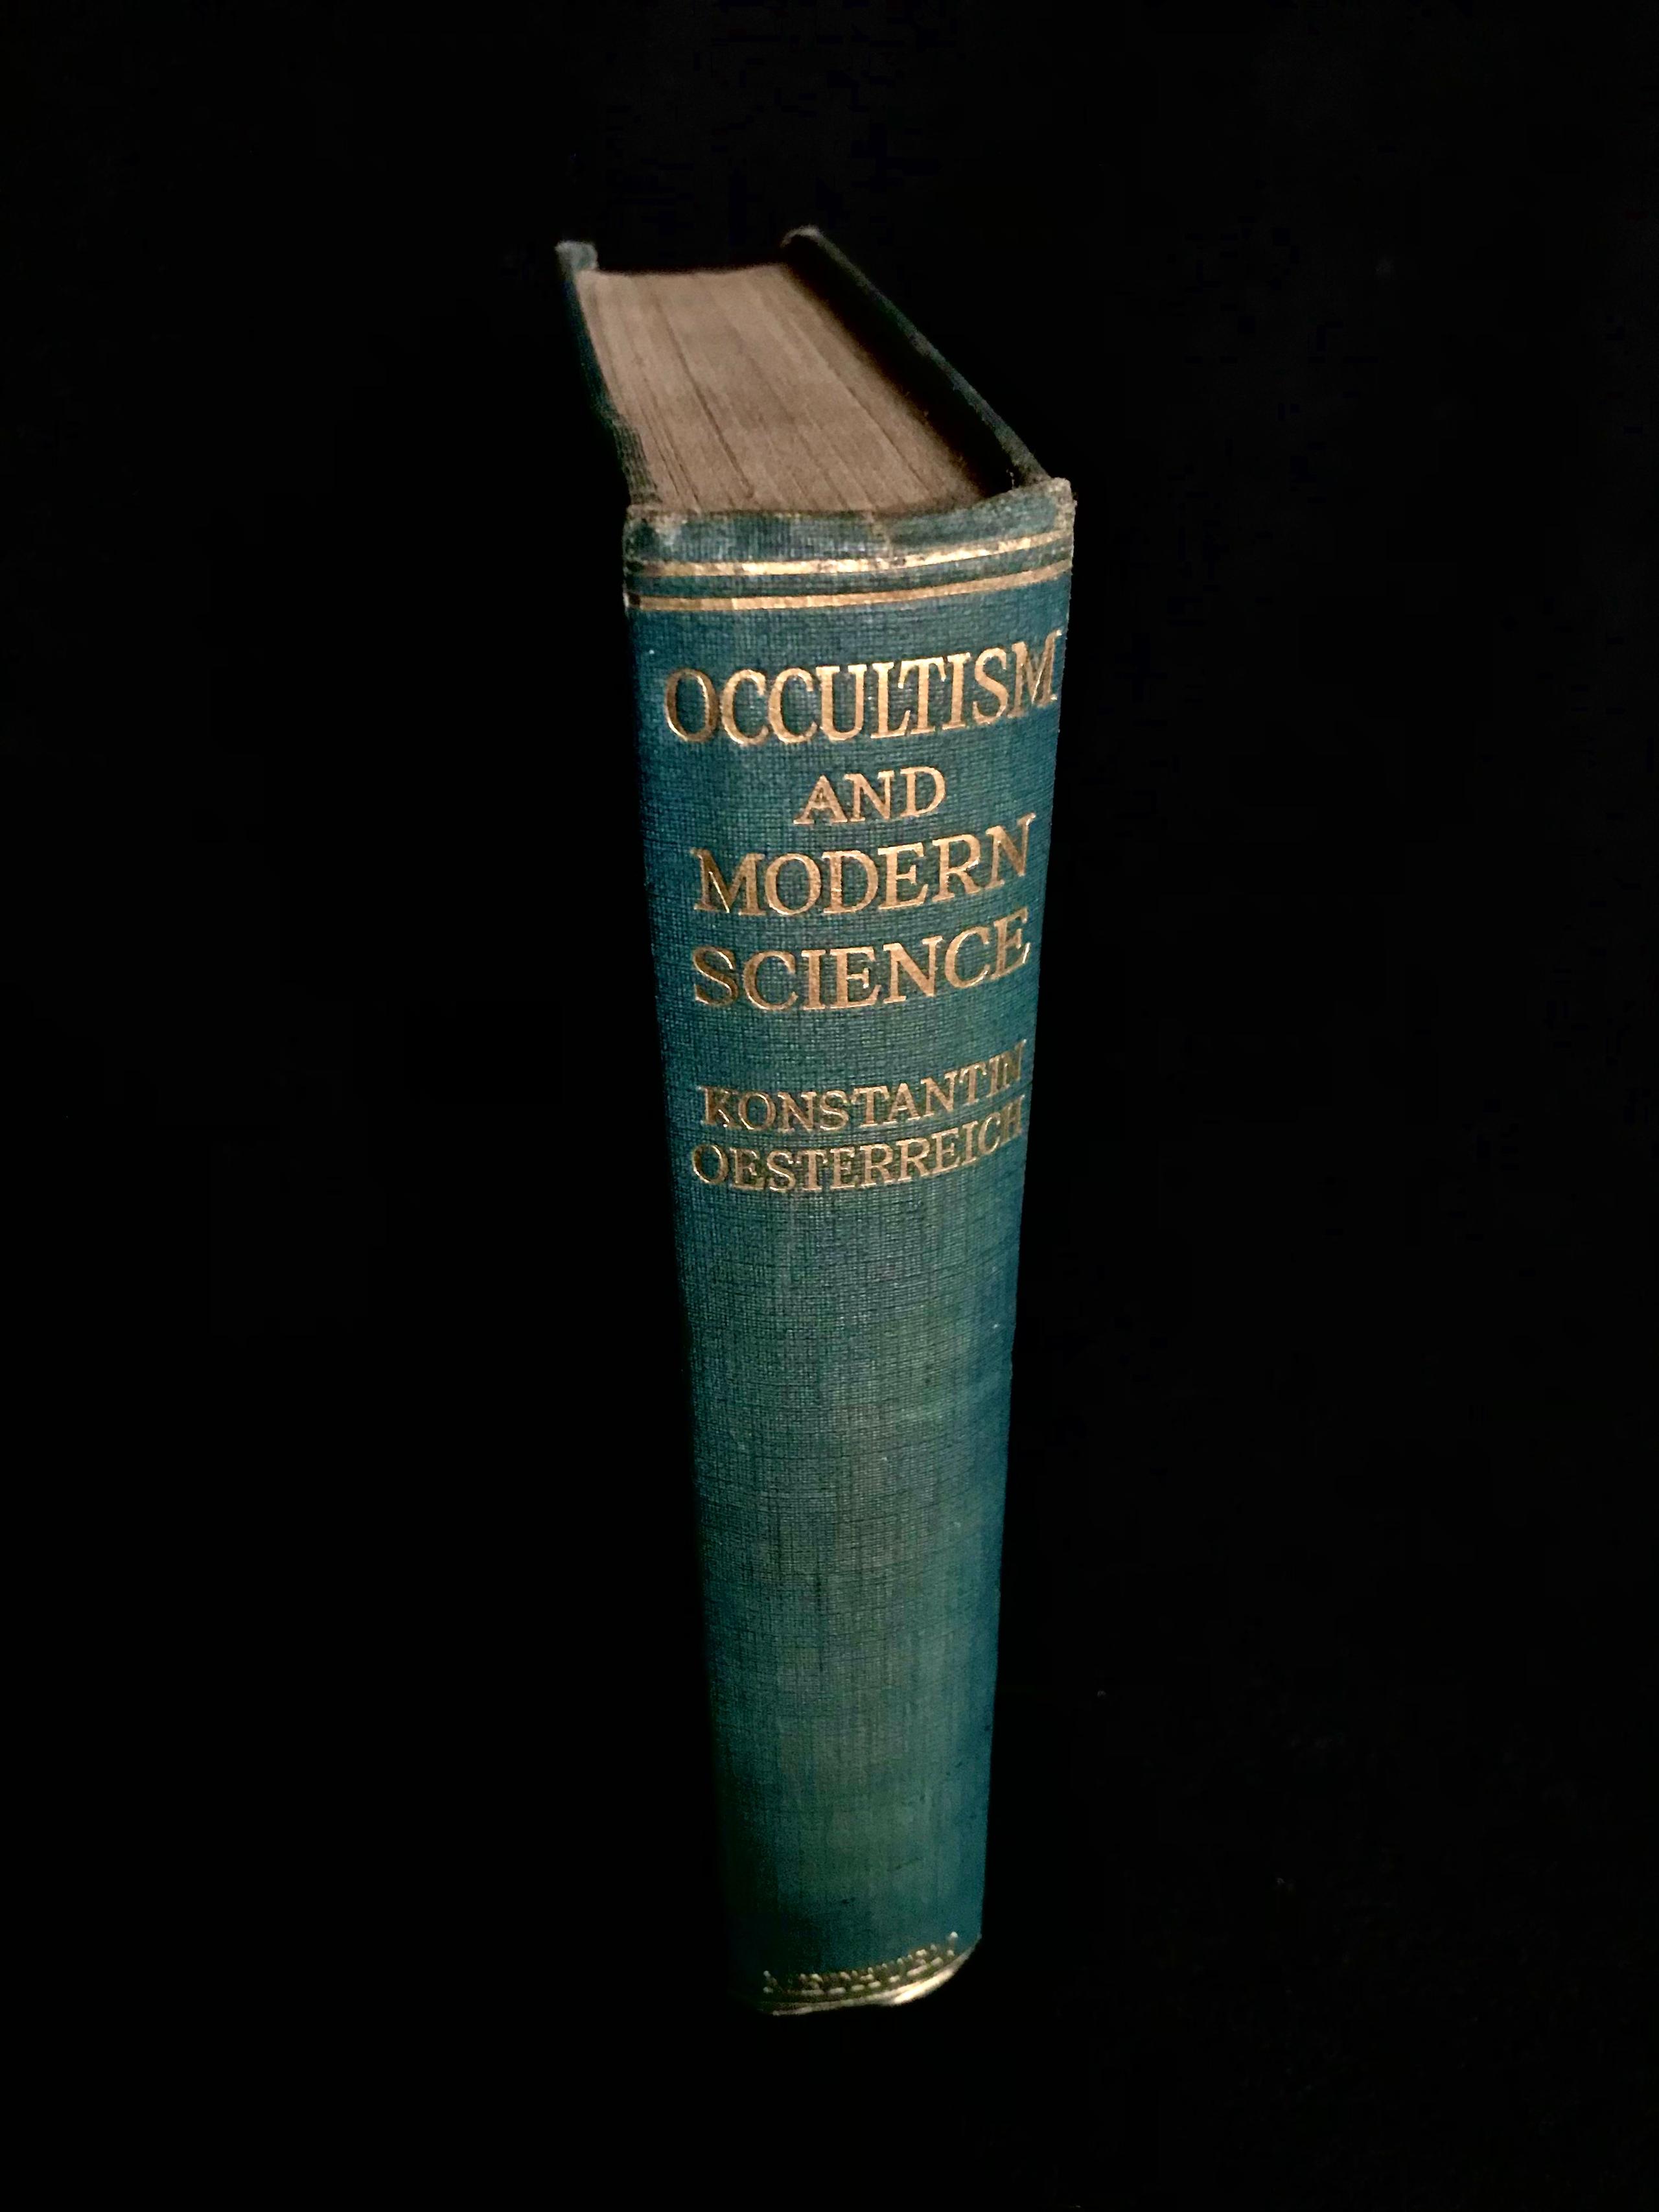 Occultism And Modern Science by T. Konstantin Oestrerreich